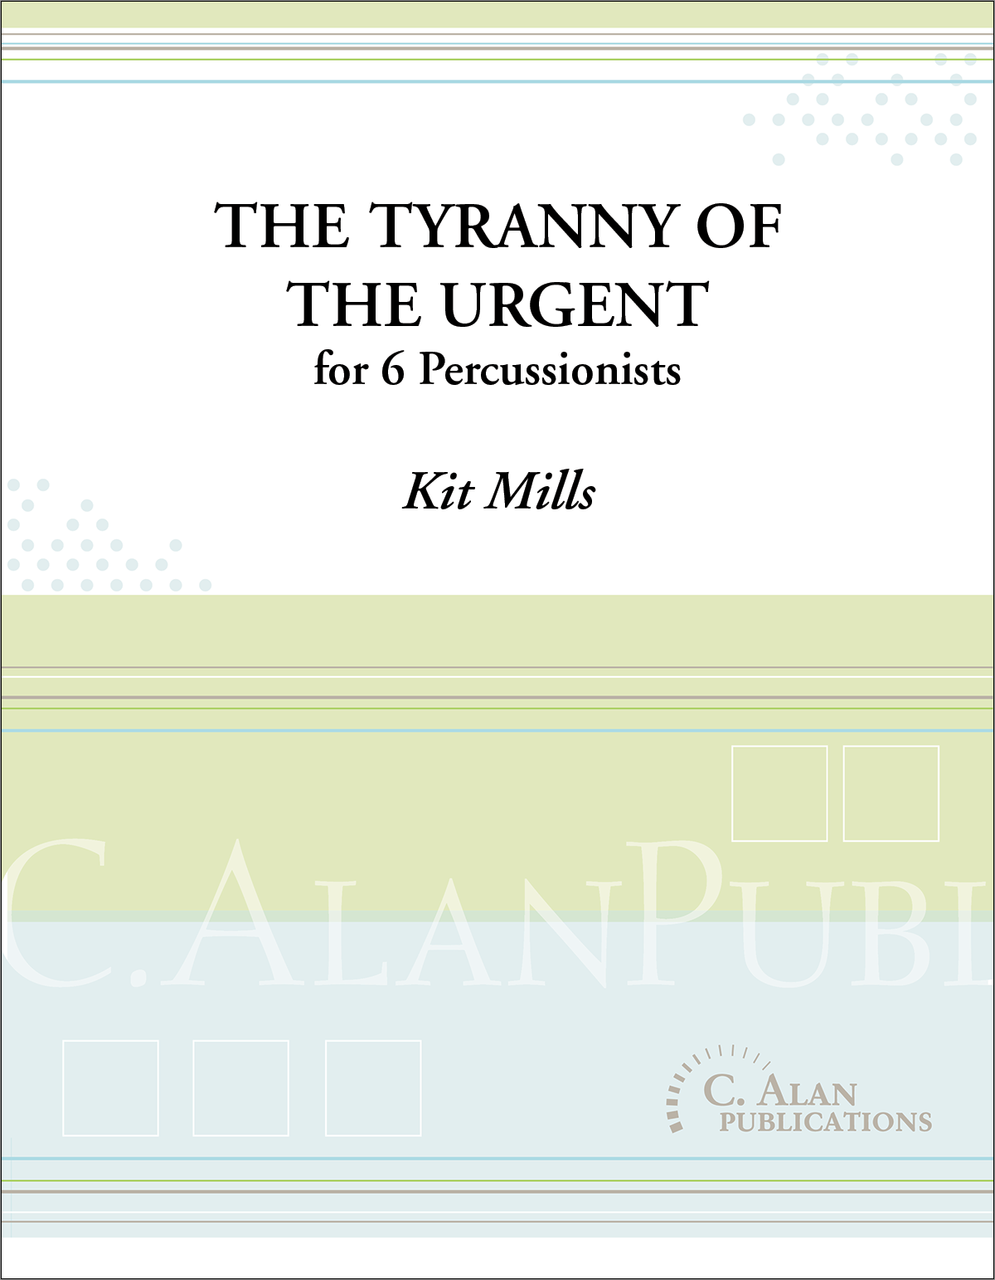 Tyranny of the Urgent by Kit Mills